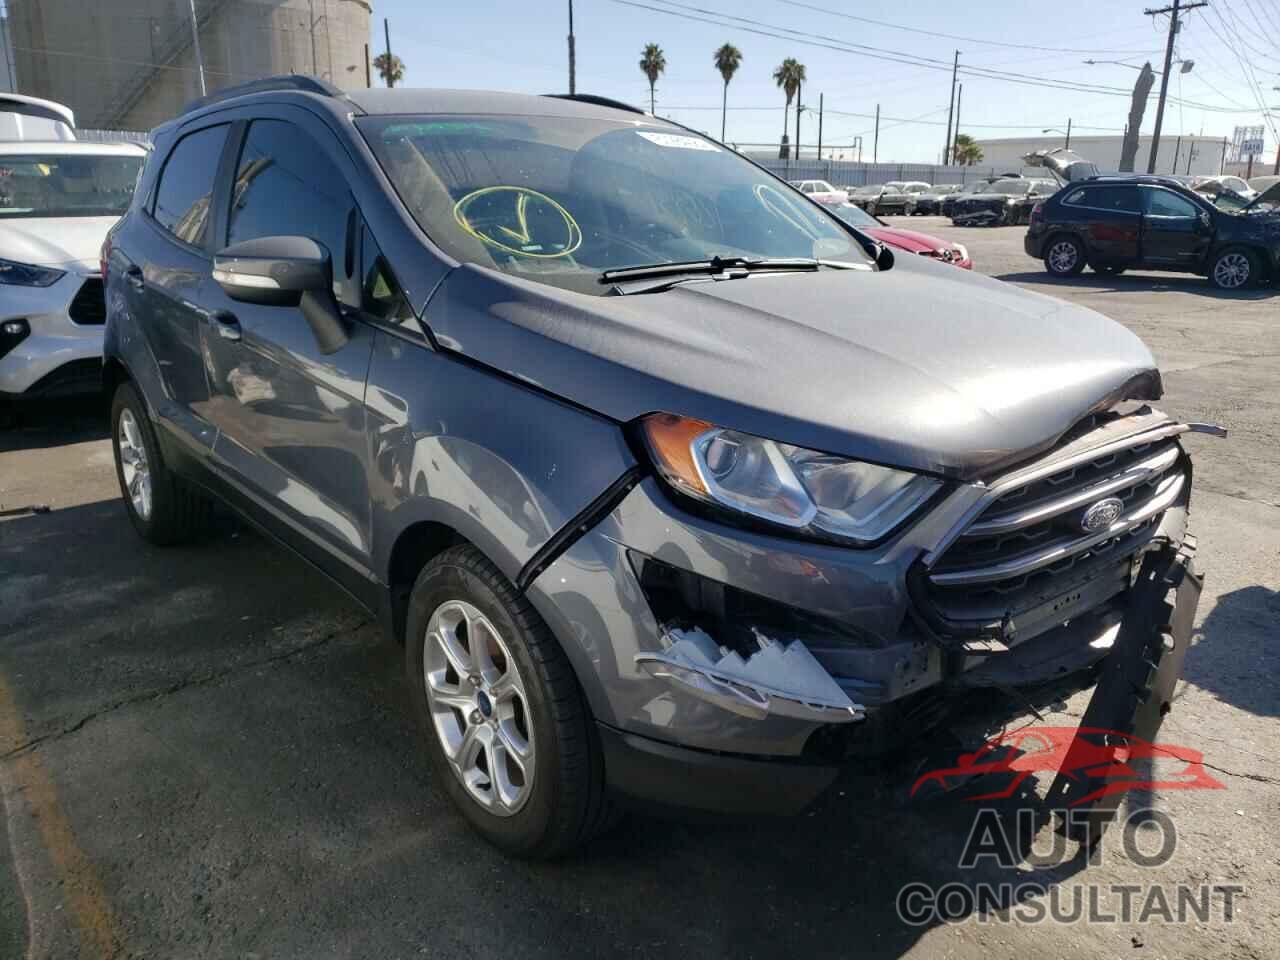 FORD ALL OTHER 2019 - MAJ3S2GE0KC290204